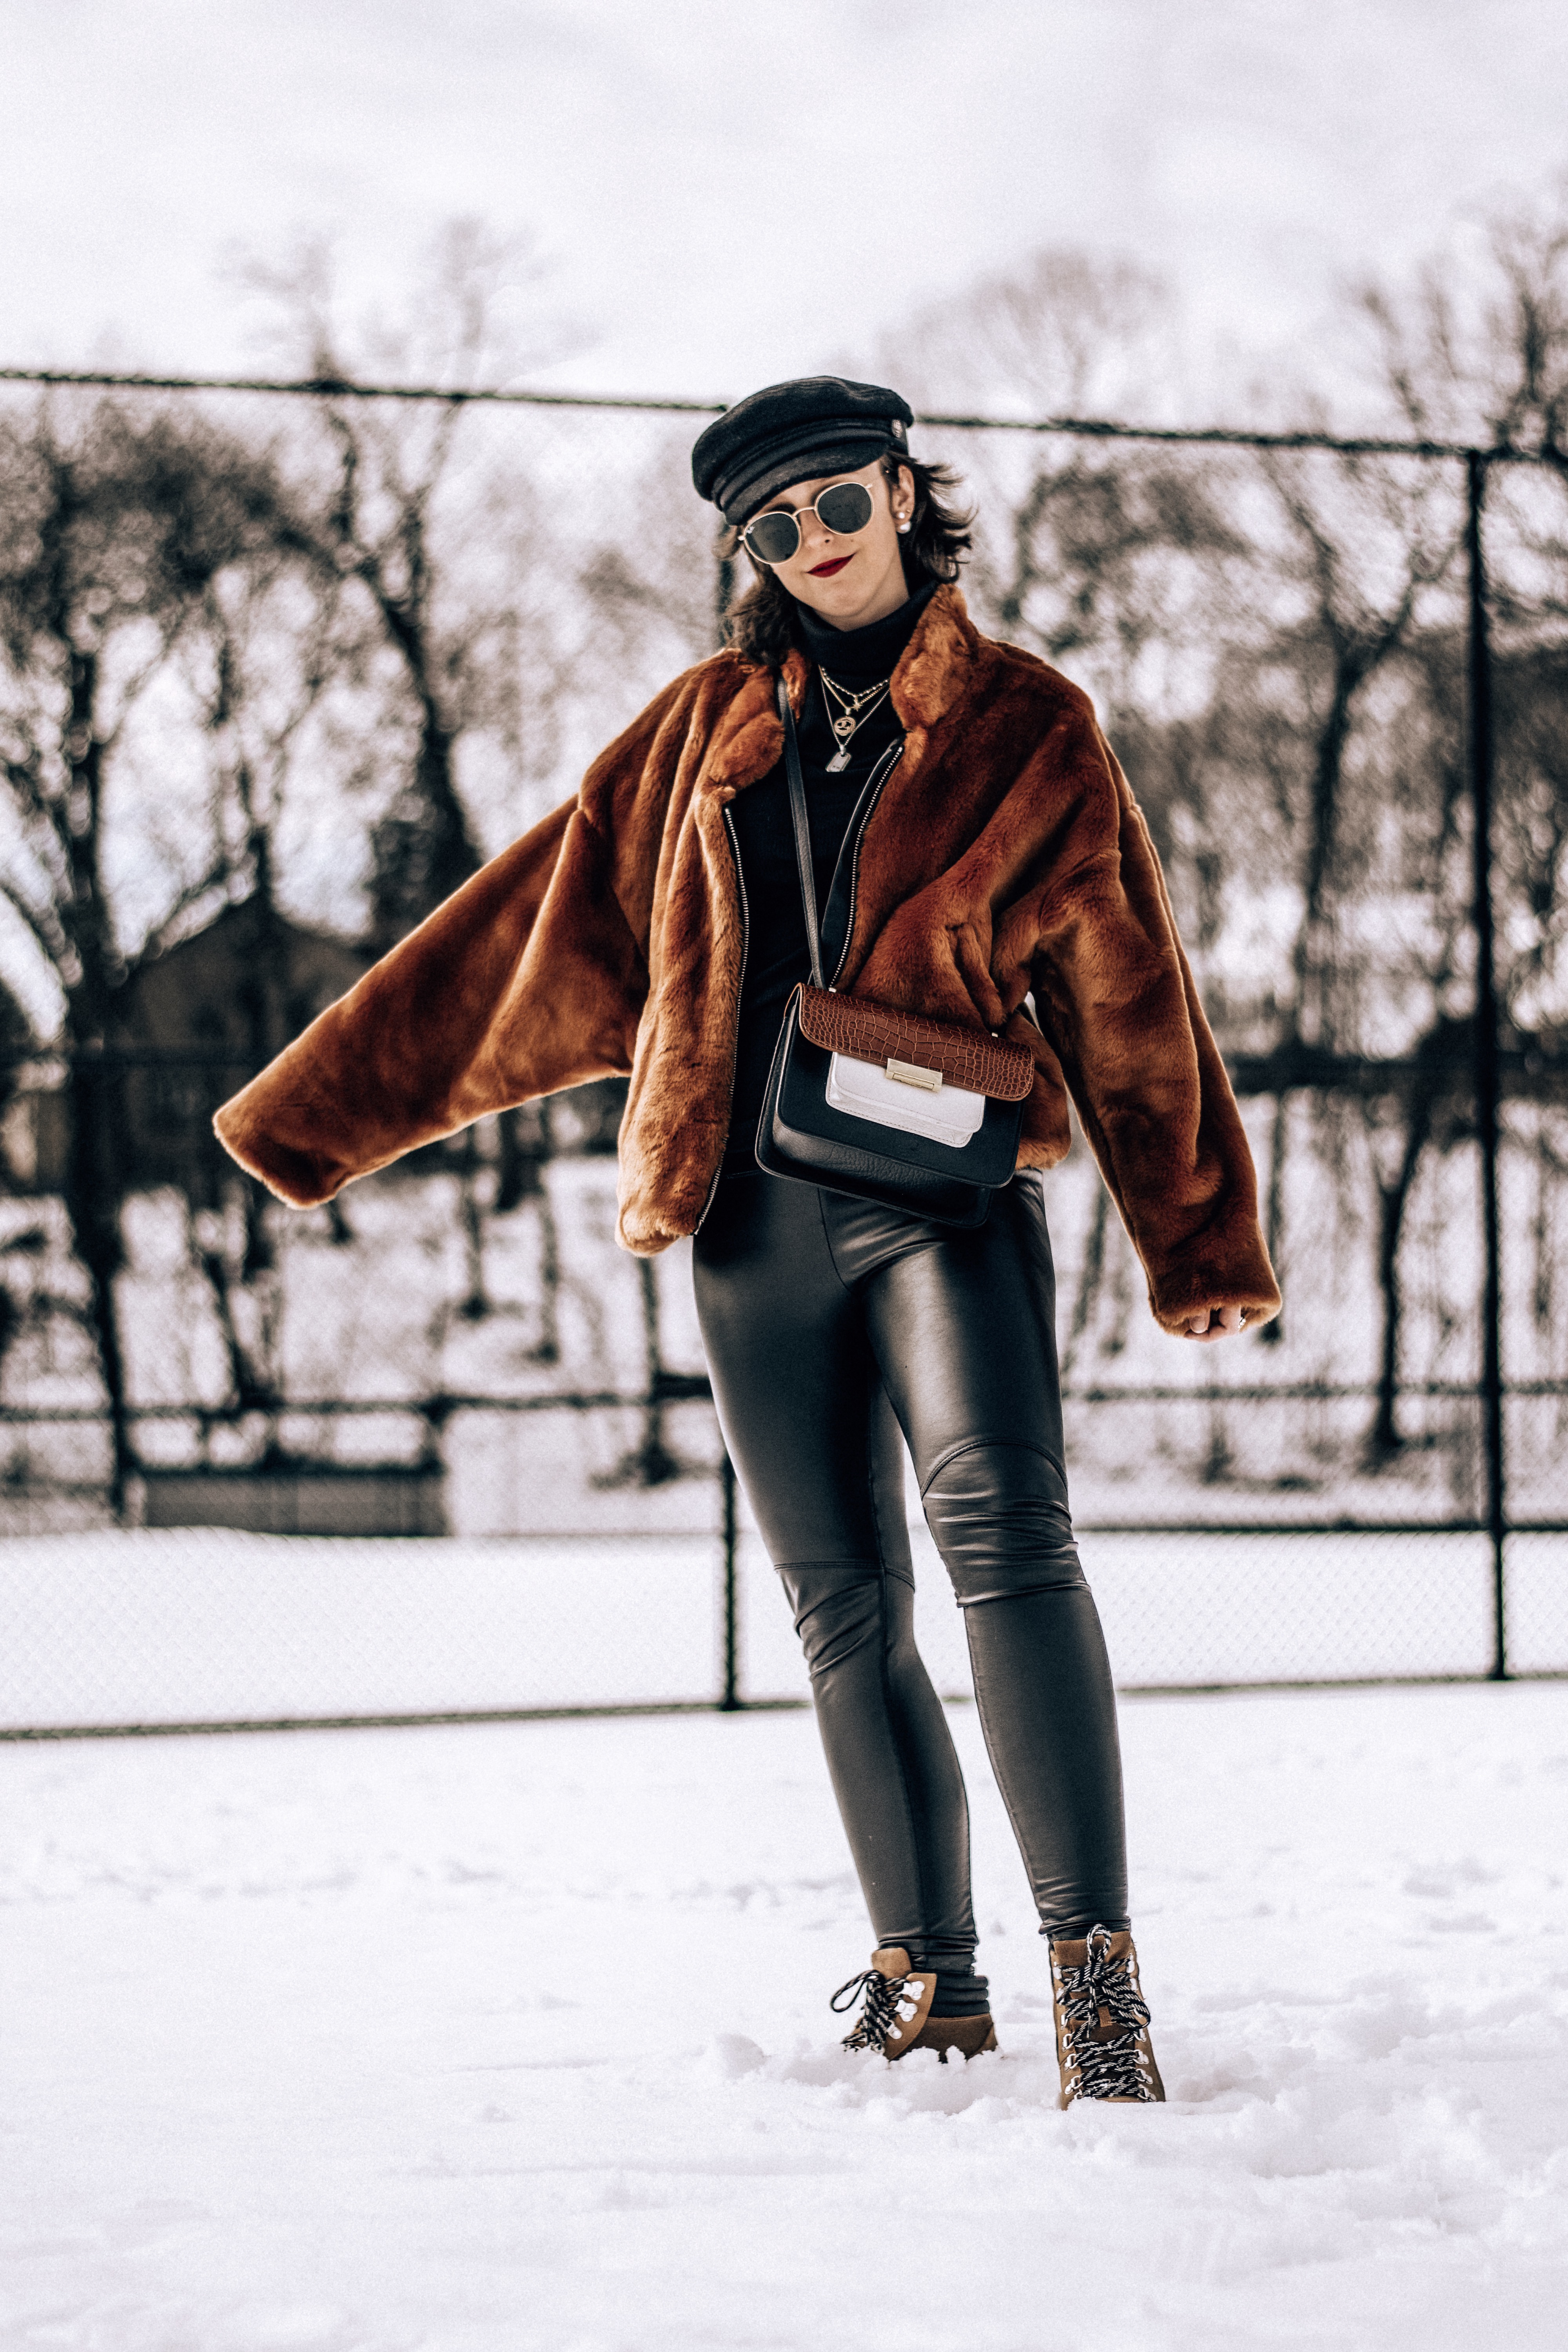 3 Winter Items To Buy On Sale Now-Faux Fur-Leather Leggings-Turtleneck-Snow #winterstyle #winterfashion #winter #fashion #style #outfit #snow #westchester #blogger